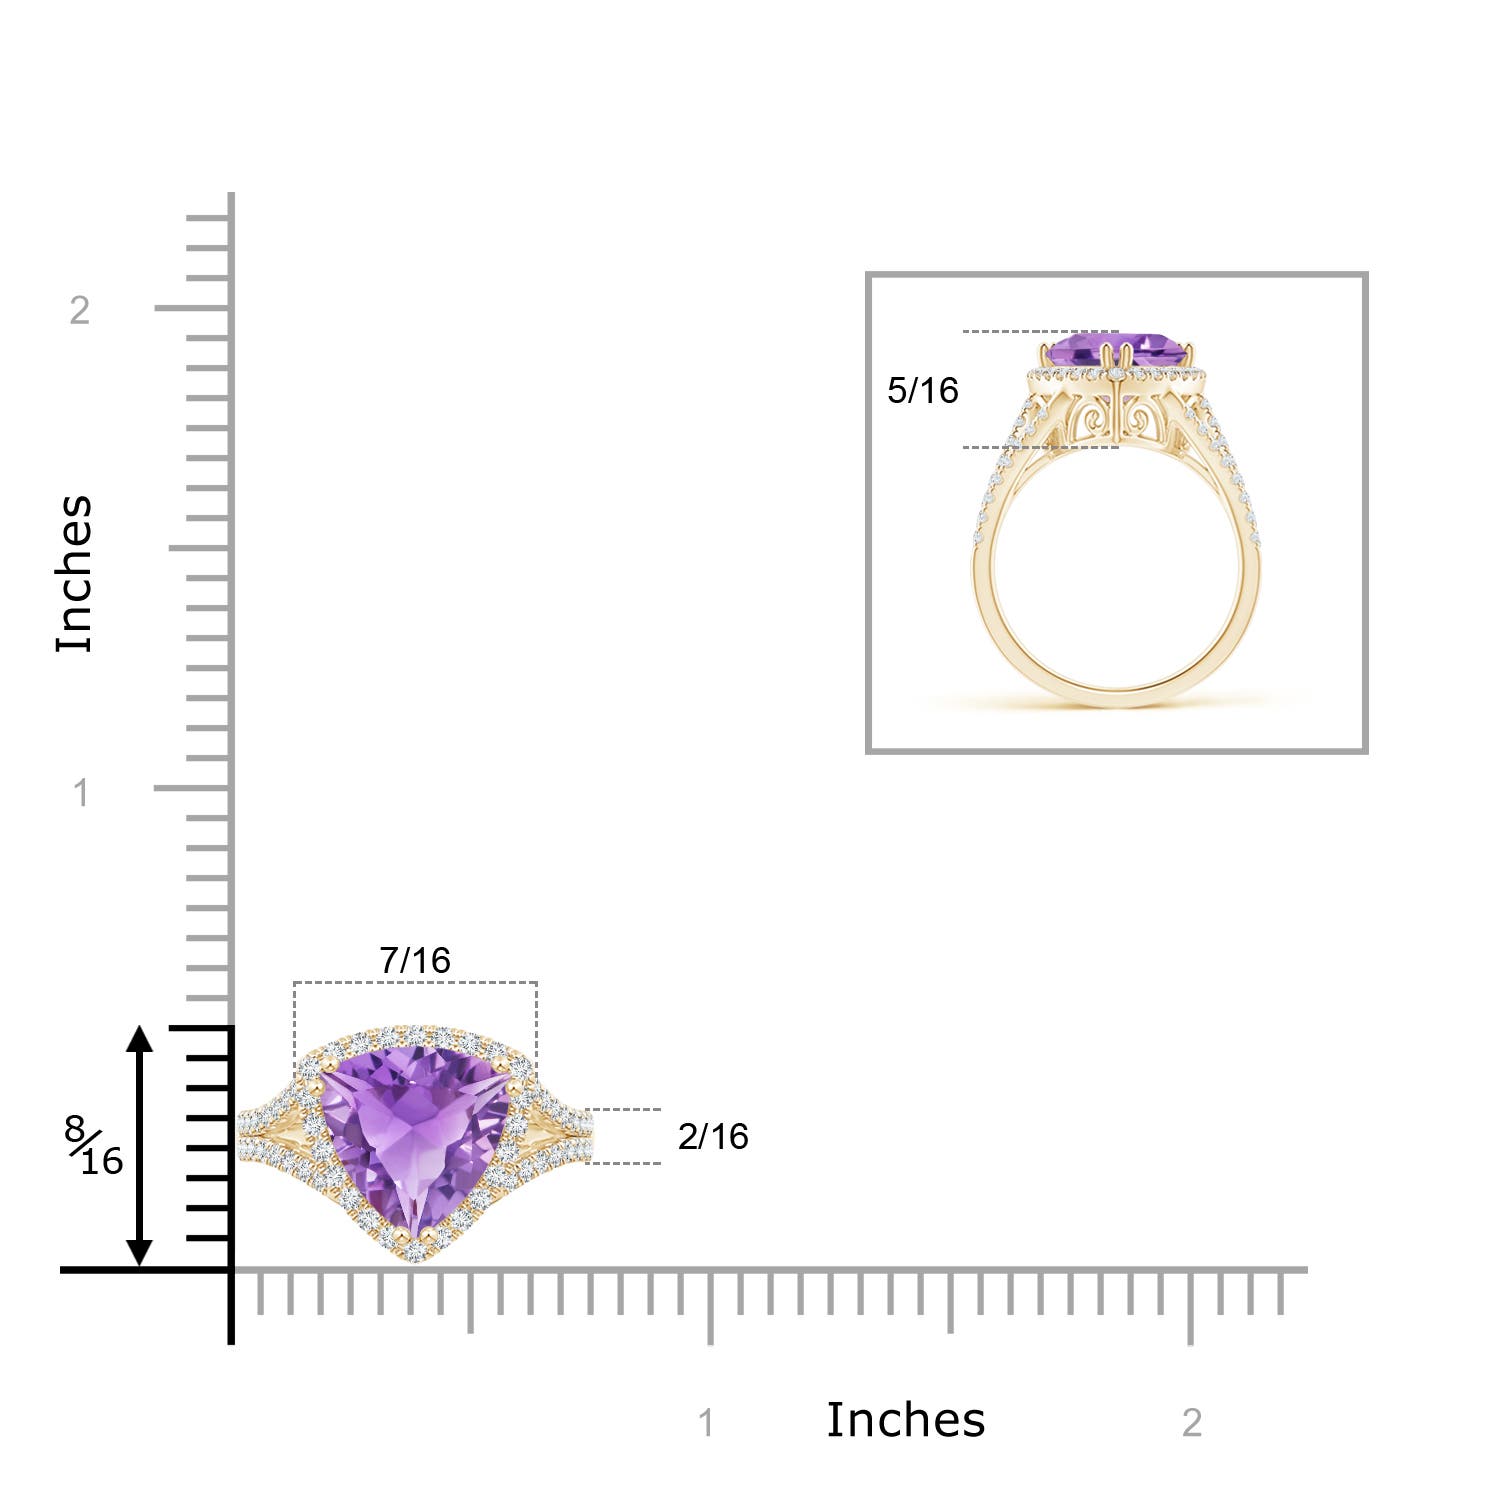 A - Amethyst / 2.64 CT / 14 KT Yellow Gold